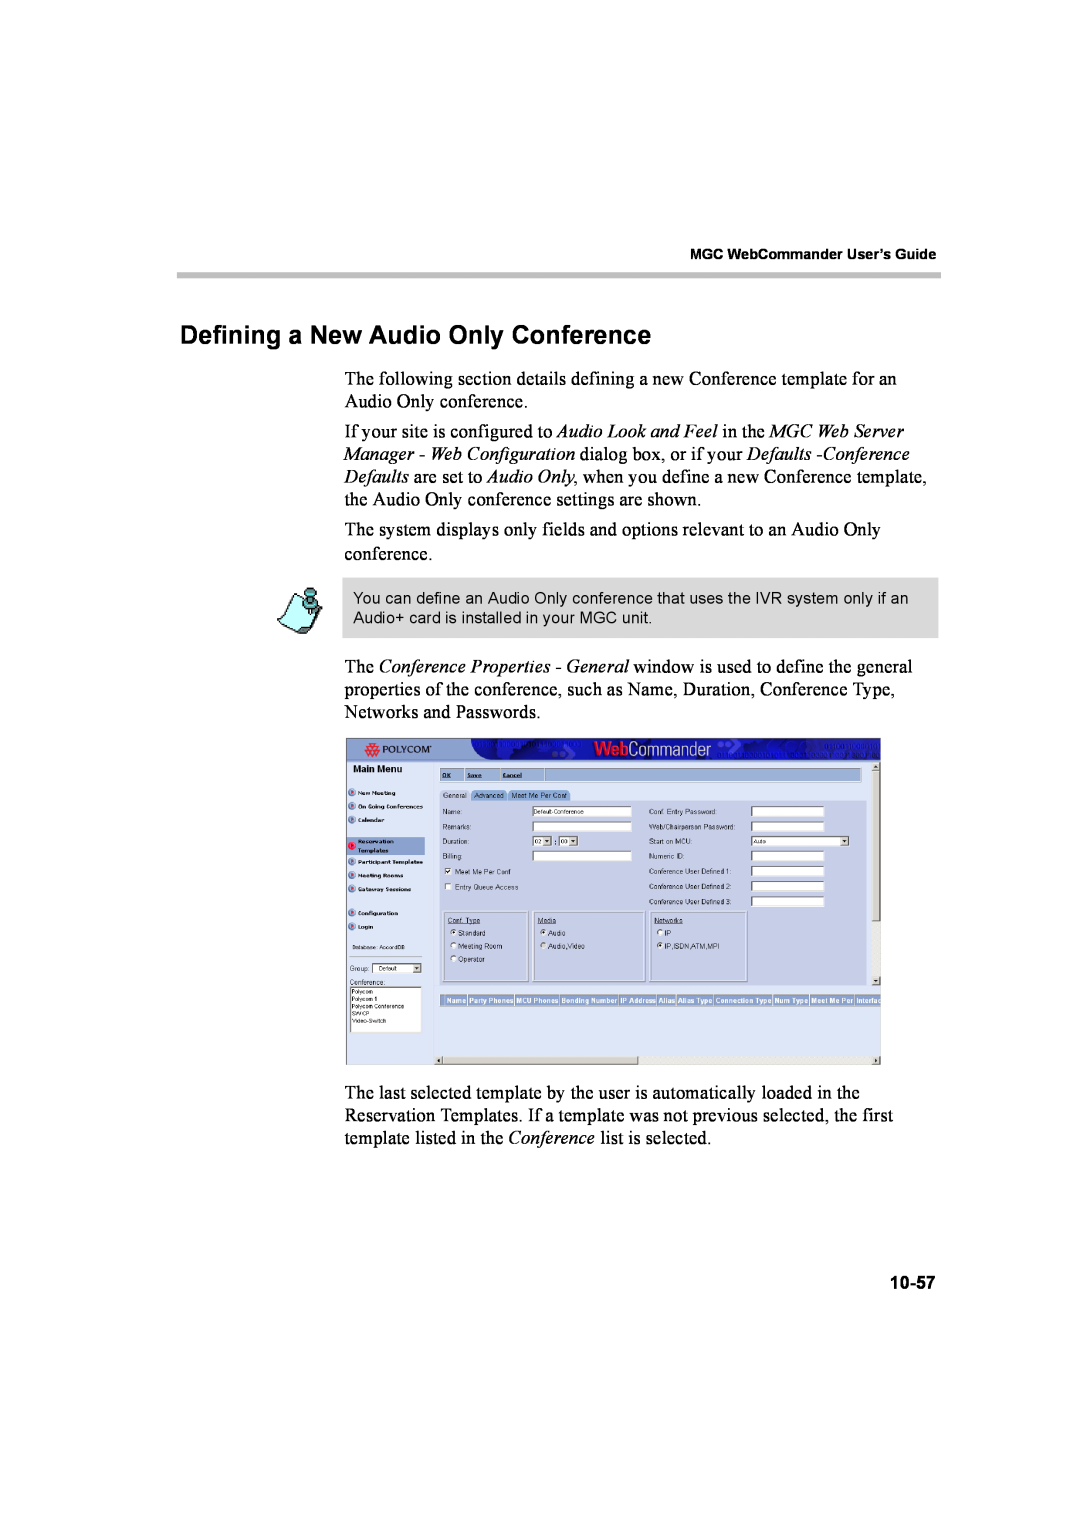 Polycom 8 manual Defining a New Audio Only Conference, Audio+ card is installed in your MGC unit 